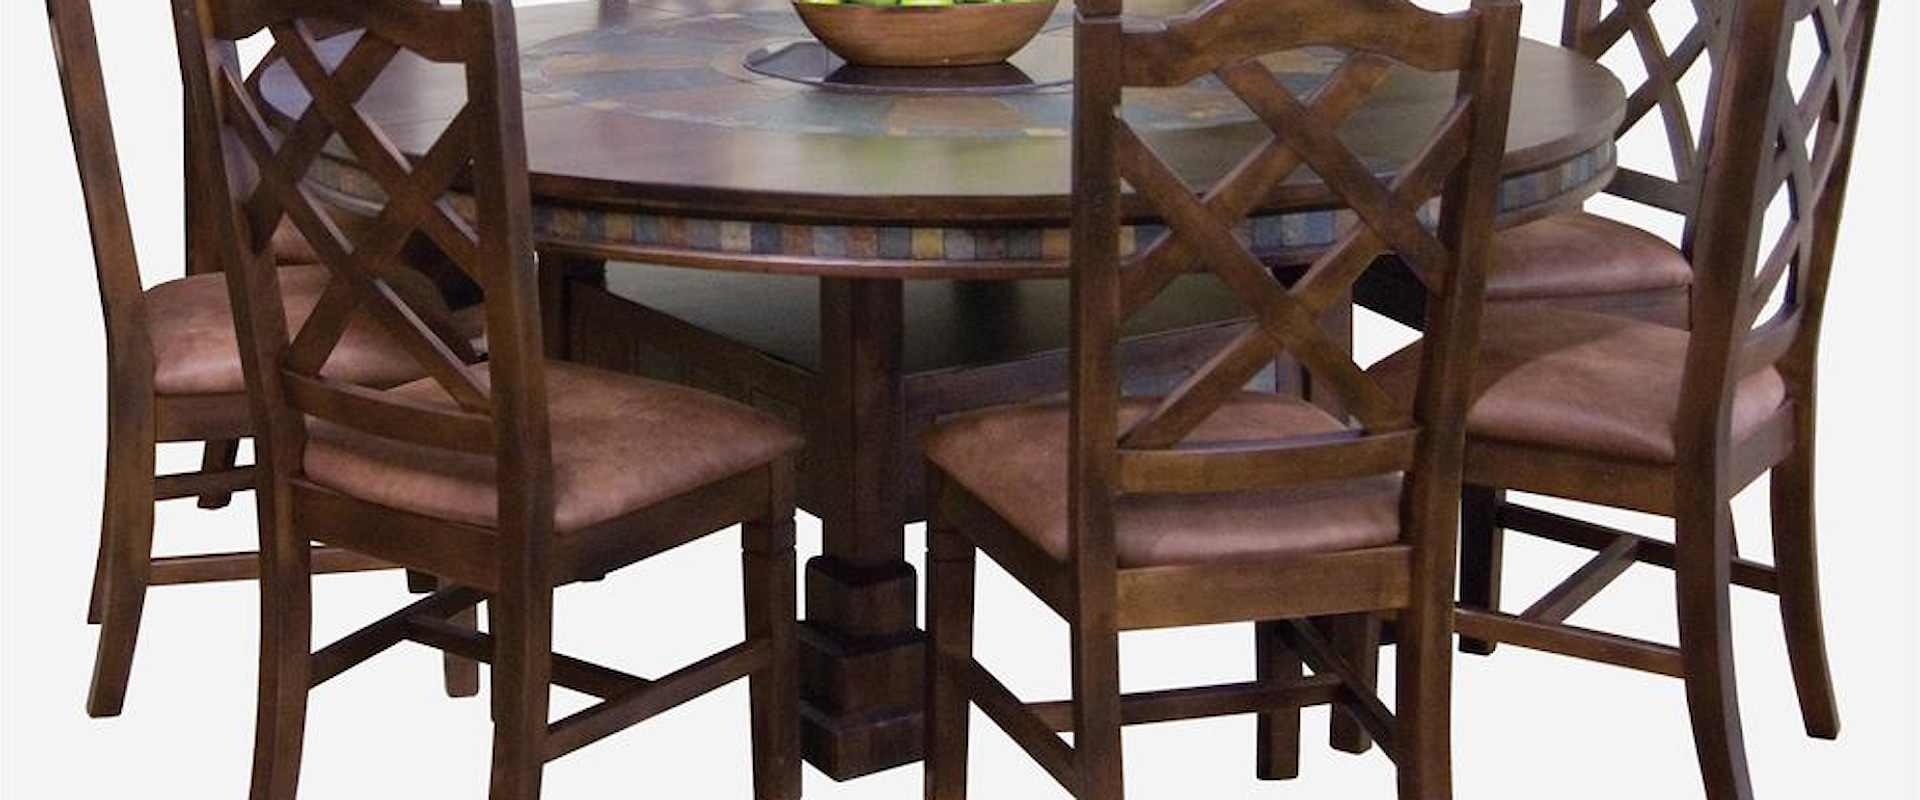 Traditional Round Dining Table and Chair Set